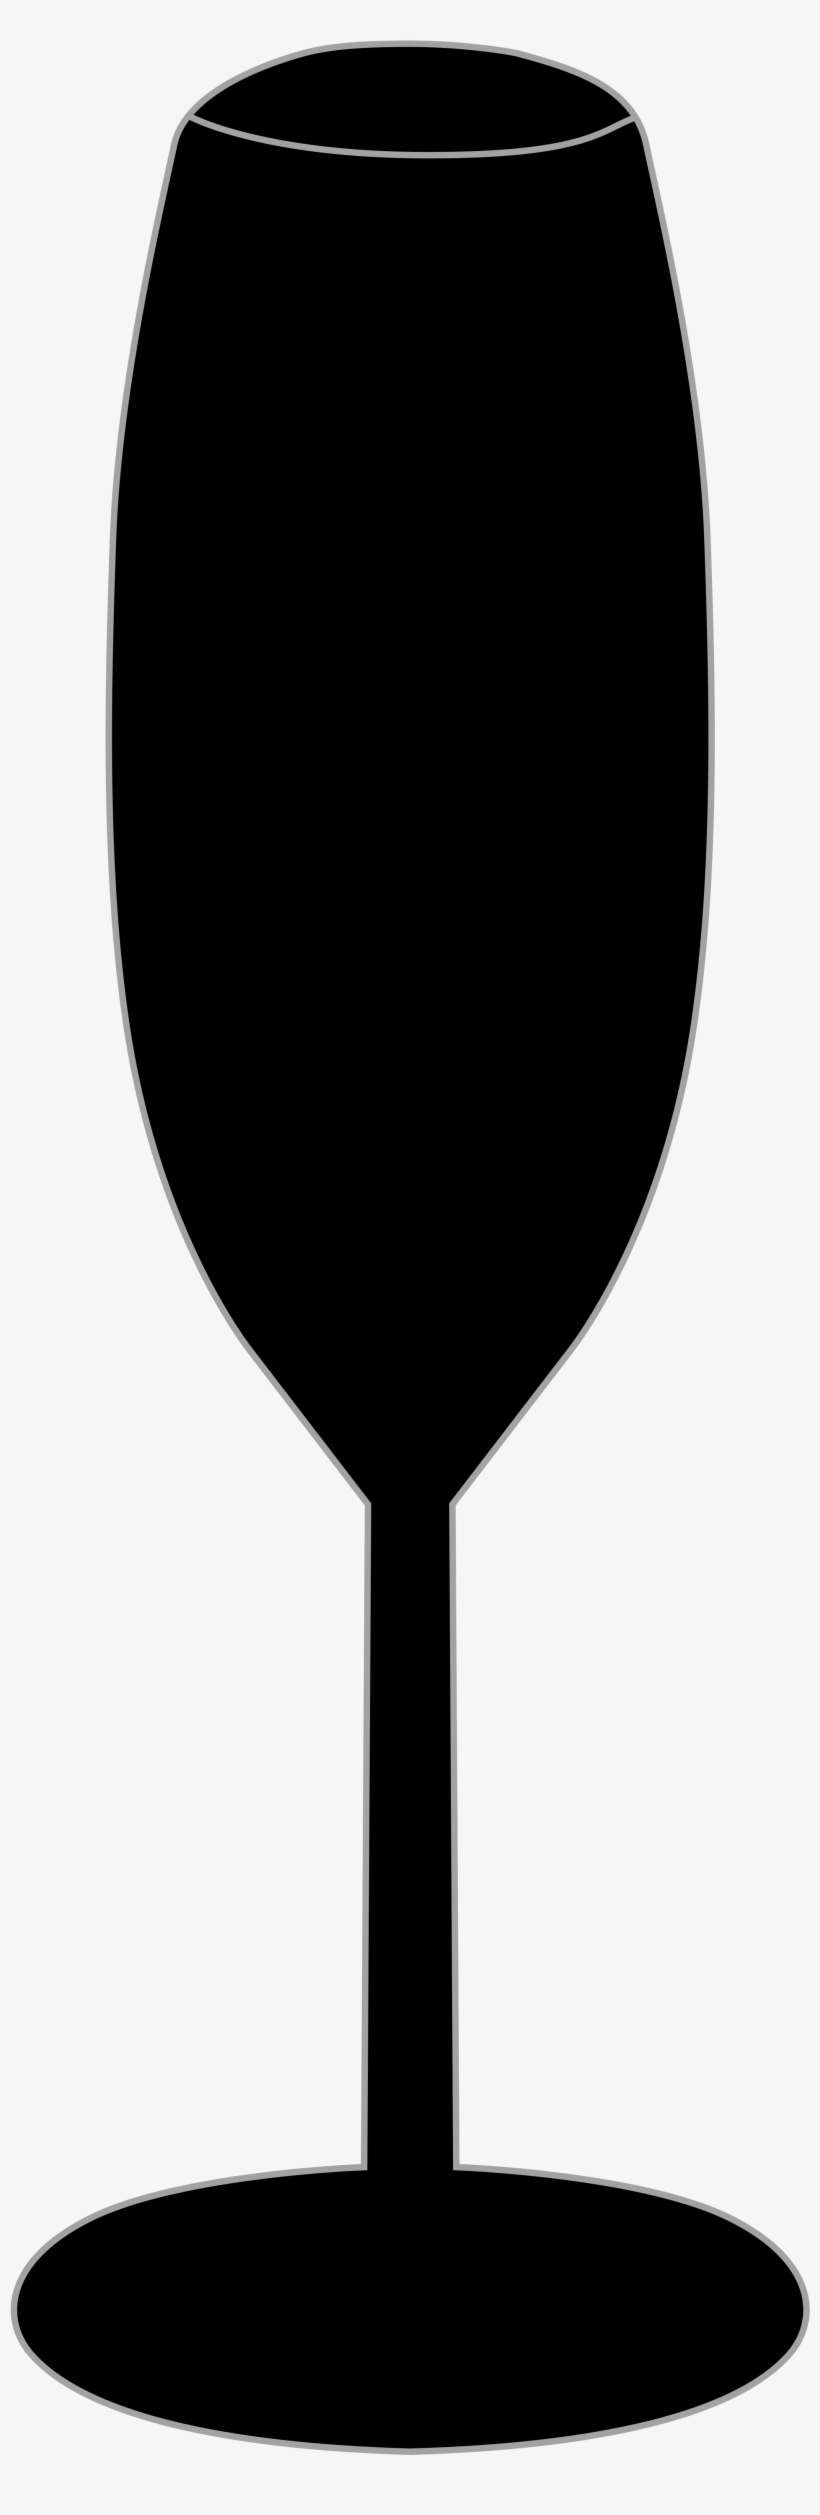 Open - Wine Glass, transparent png #9196674